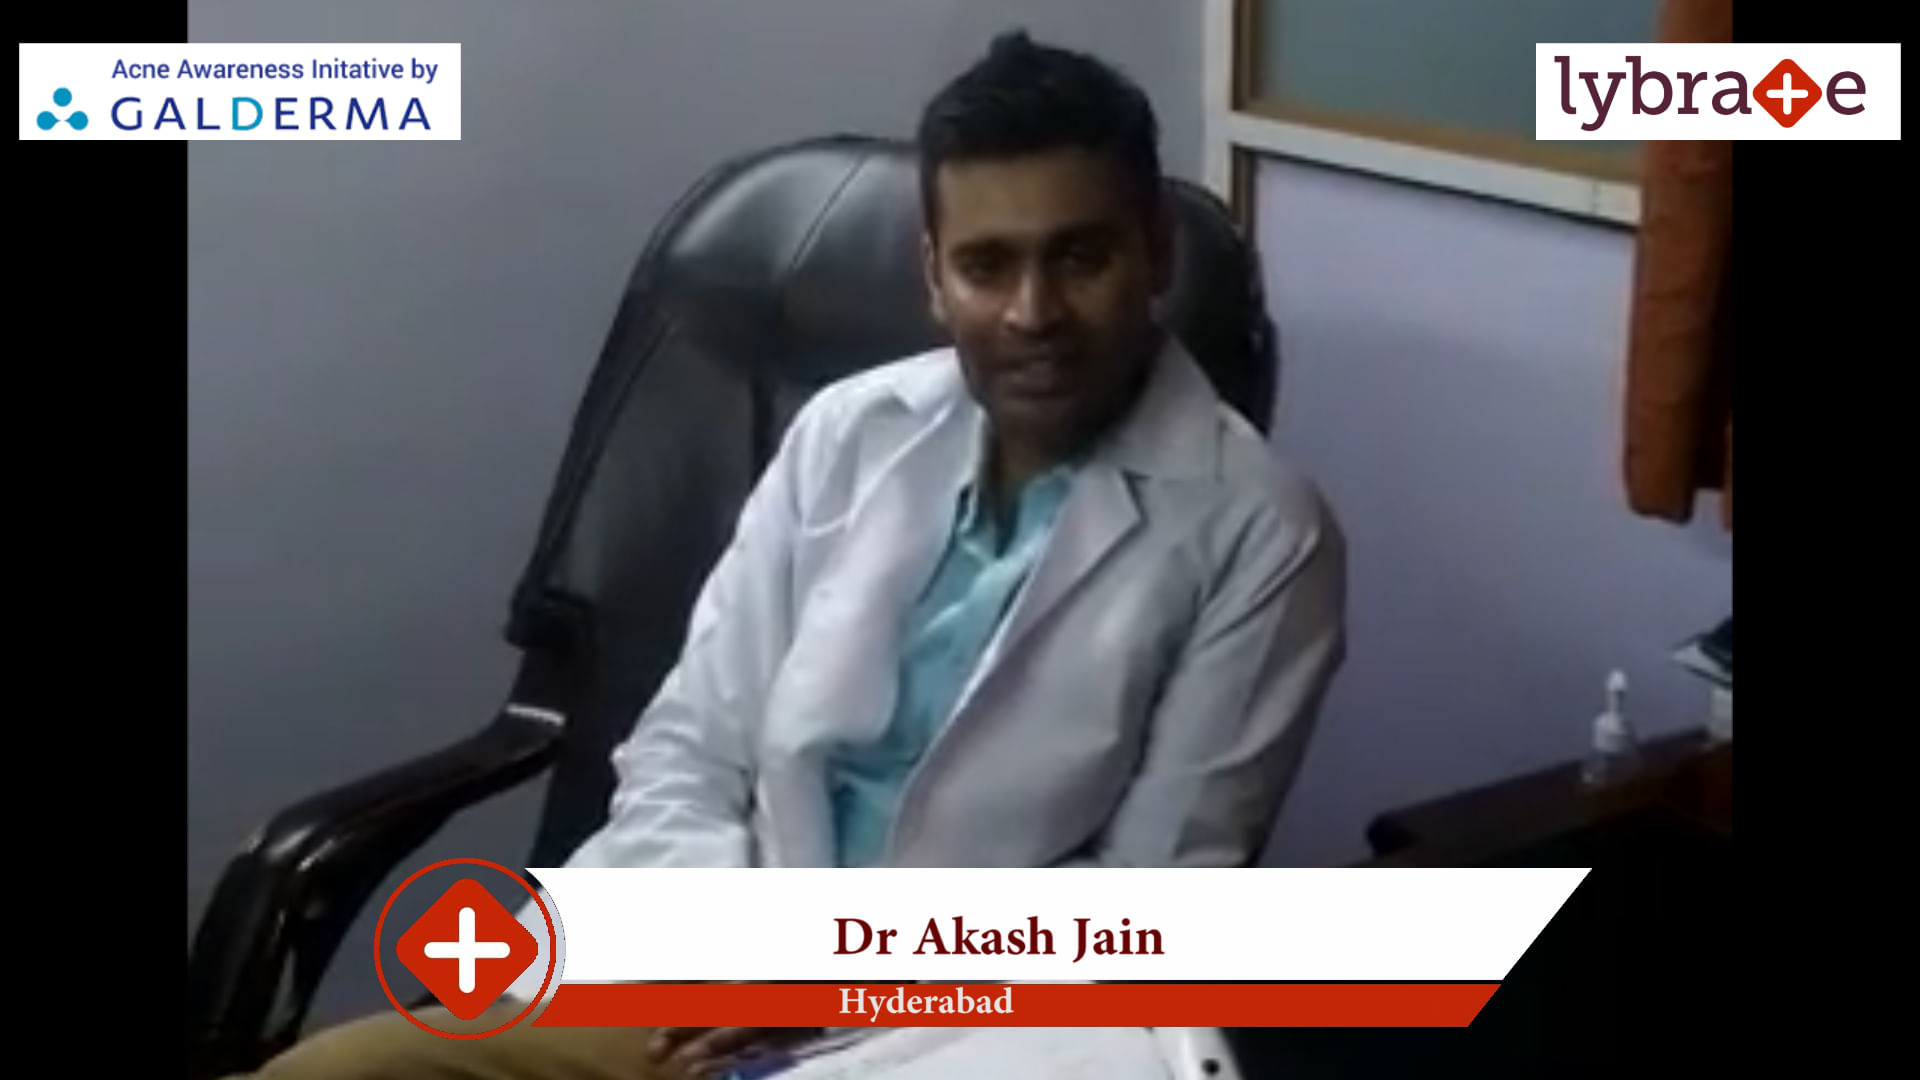 Lybrate | Dr. Akash Jain  speaks on IMPORTANCE OF TREATING ACNE EARLY